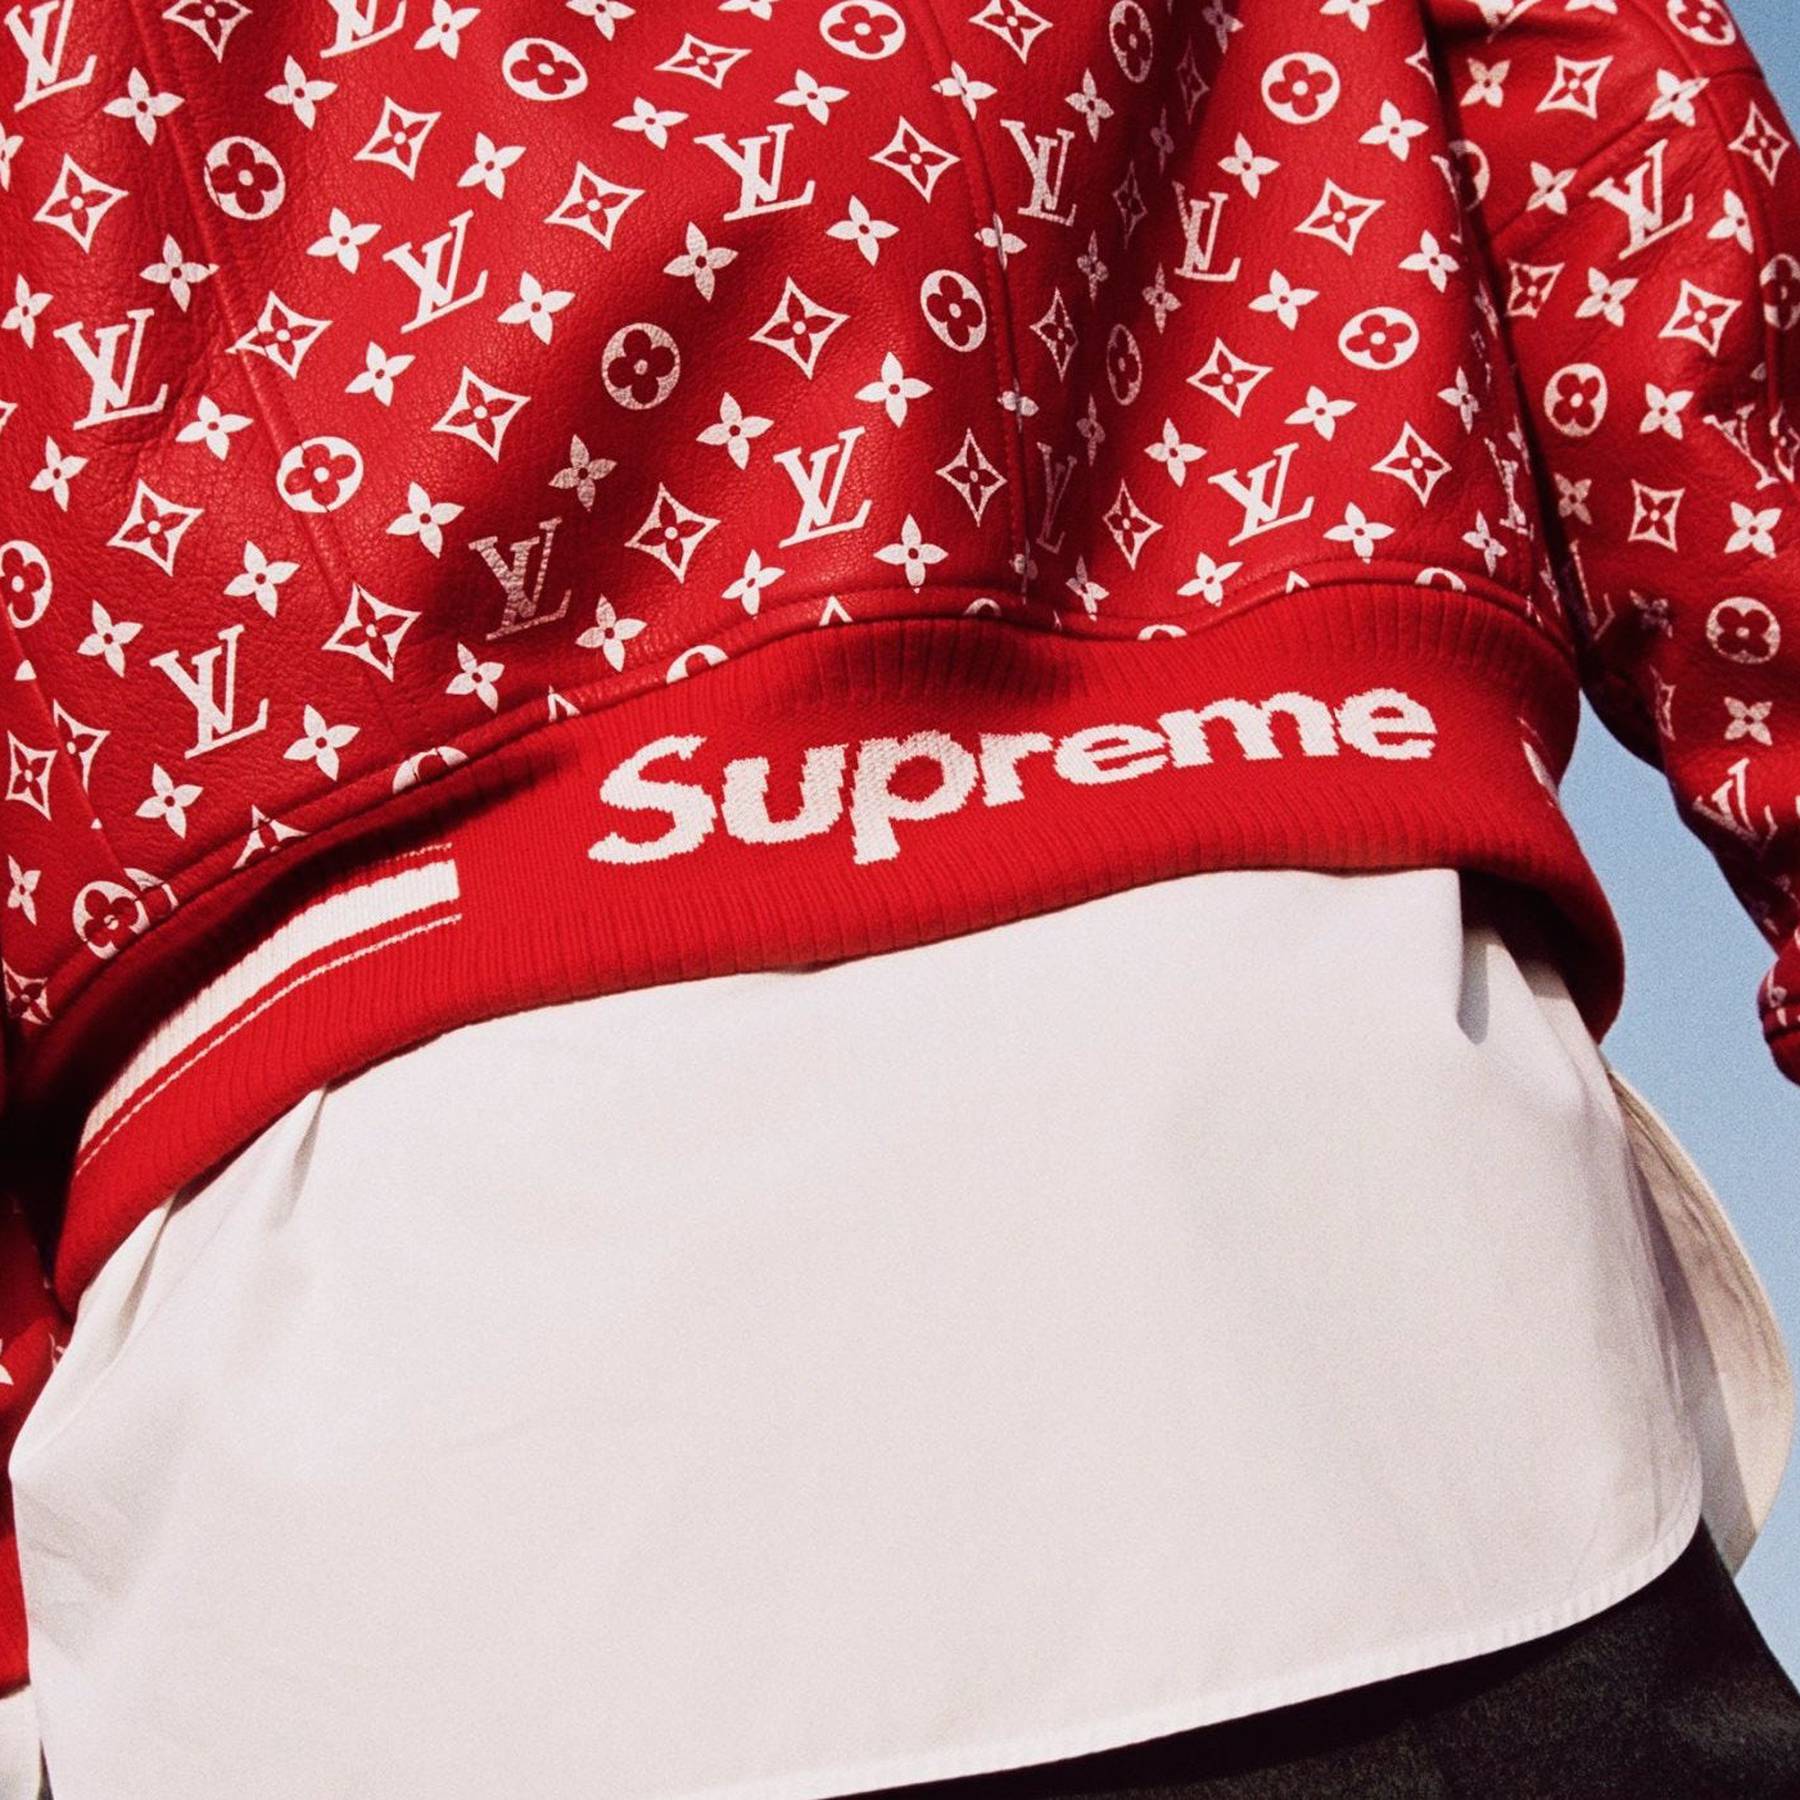 Supreme x Louis Vuitton: Where To Buy It Right Now in Los Angeles